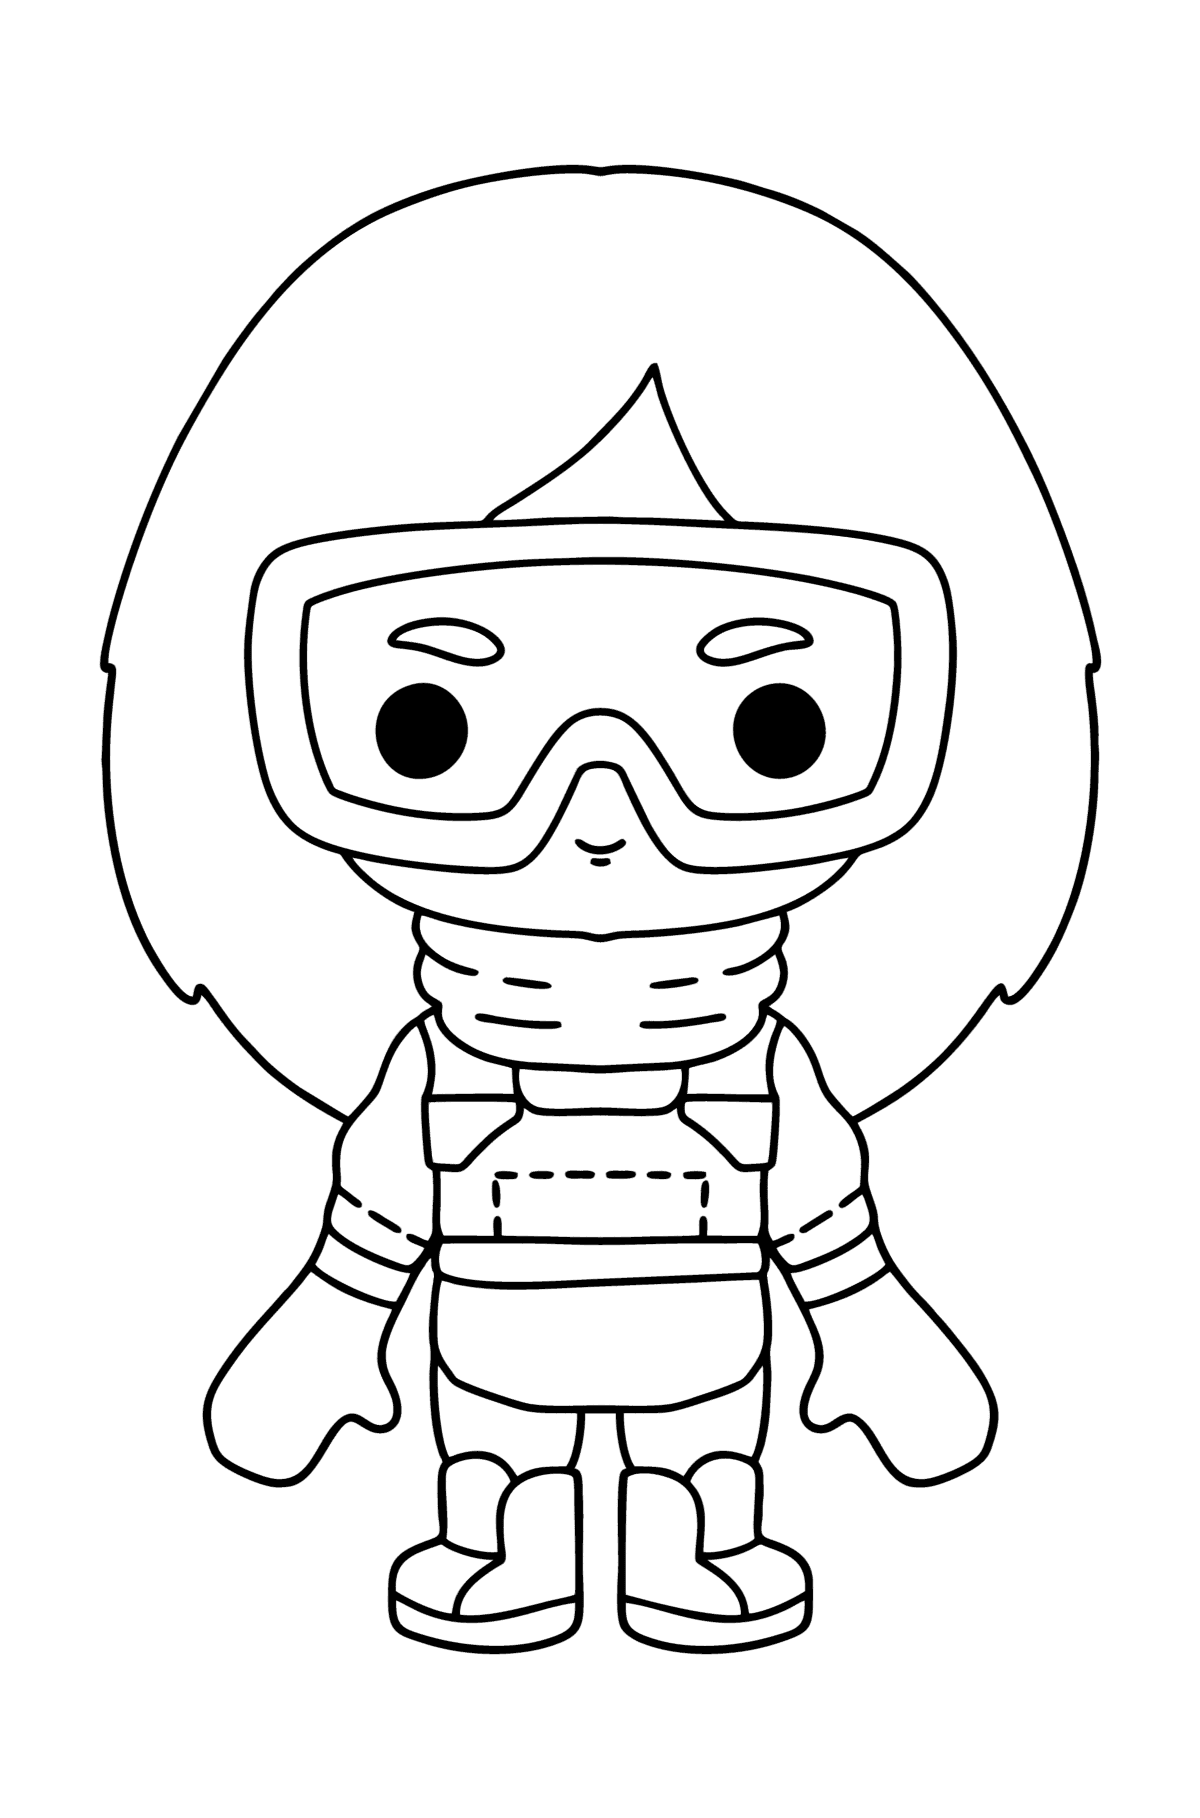 Coloring page Girl tocaboca 05 - Coloring Pages for Kids